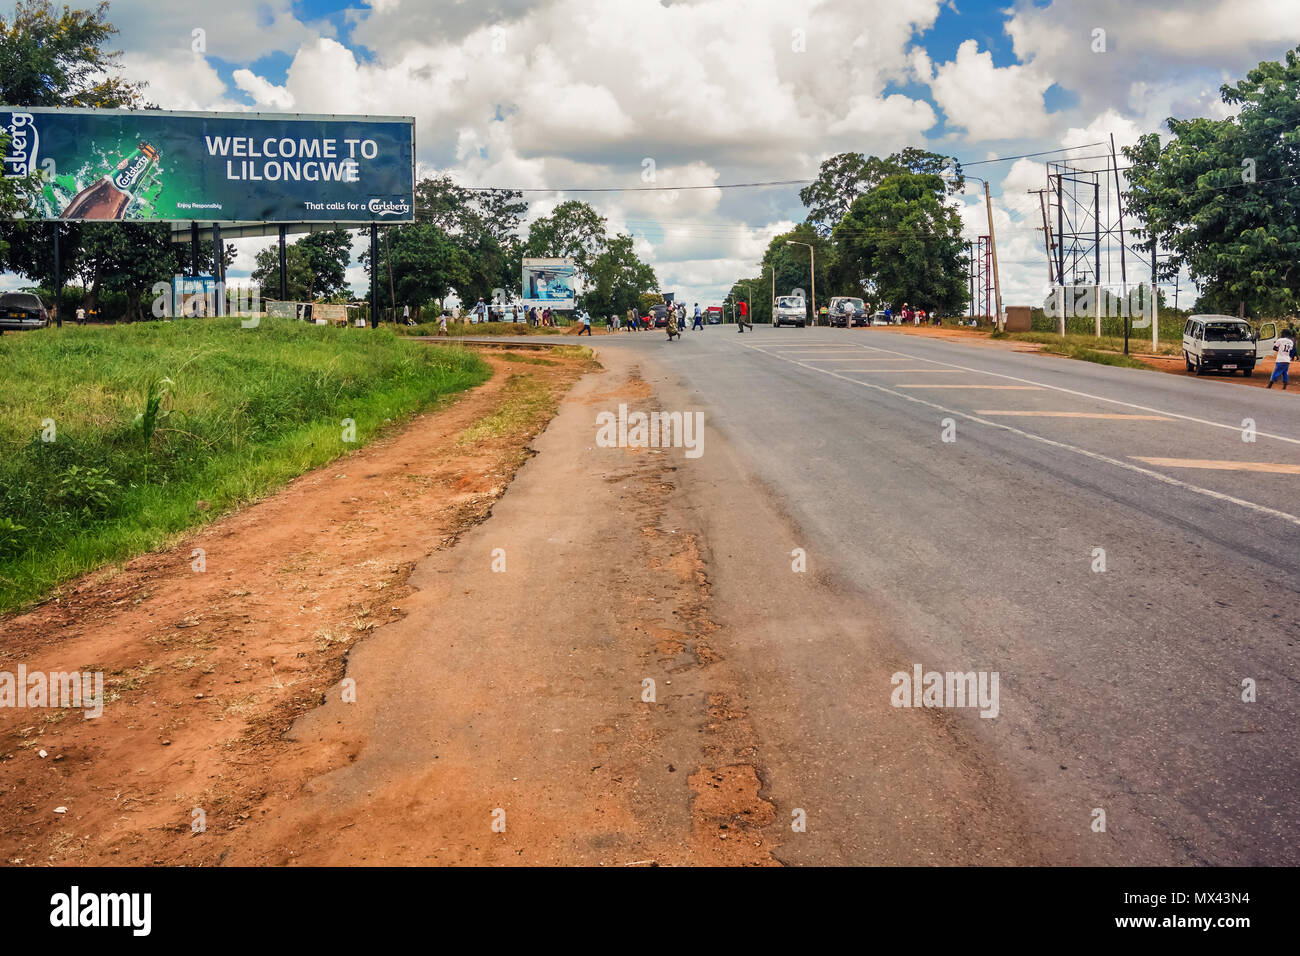 Lilongwe, Malawi - March 28, 2015: Welcome sign on the road to Lilongwe in Malawi. Stock Photo